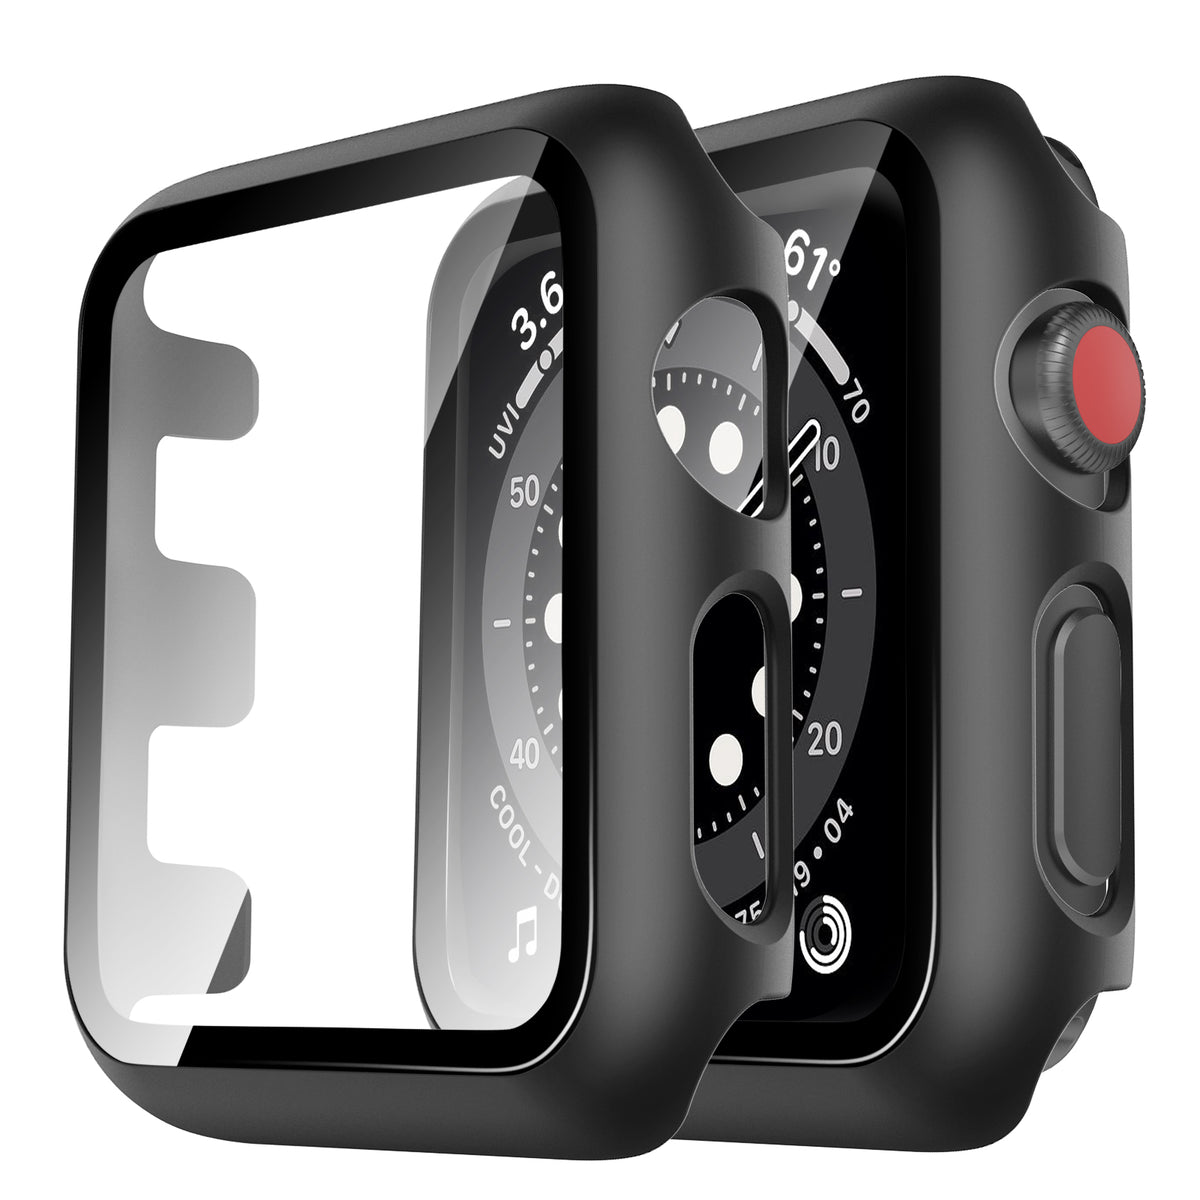 TAURI 2 Pack Hard Case Designed for Apple Watch Series 3/2/1 38mm, [Full Coverage] with 9H Tempered Glass Screen Protector [Touch Sensitive], Slim Protective Cover for iWatch 38mm